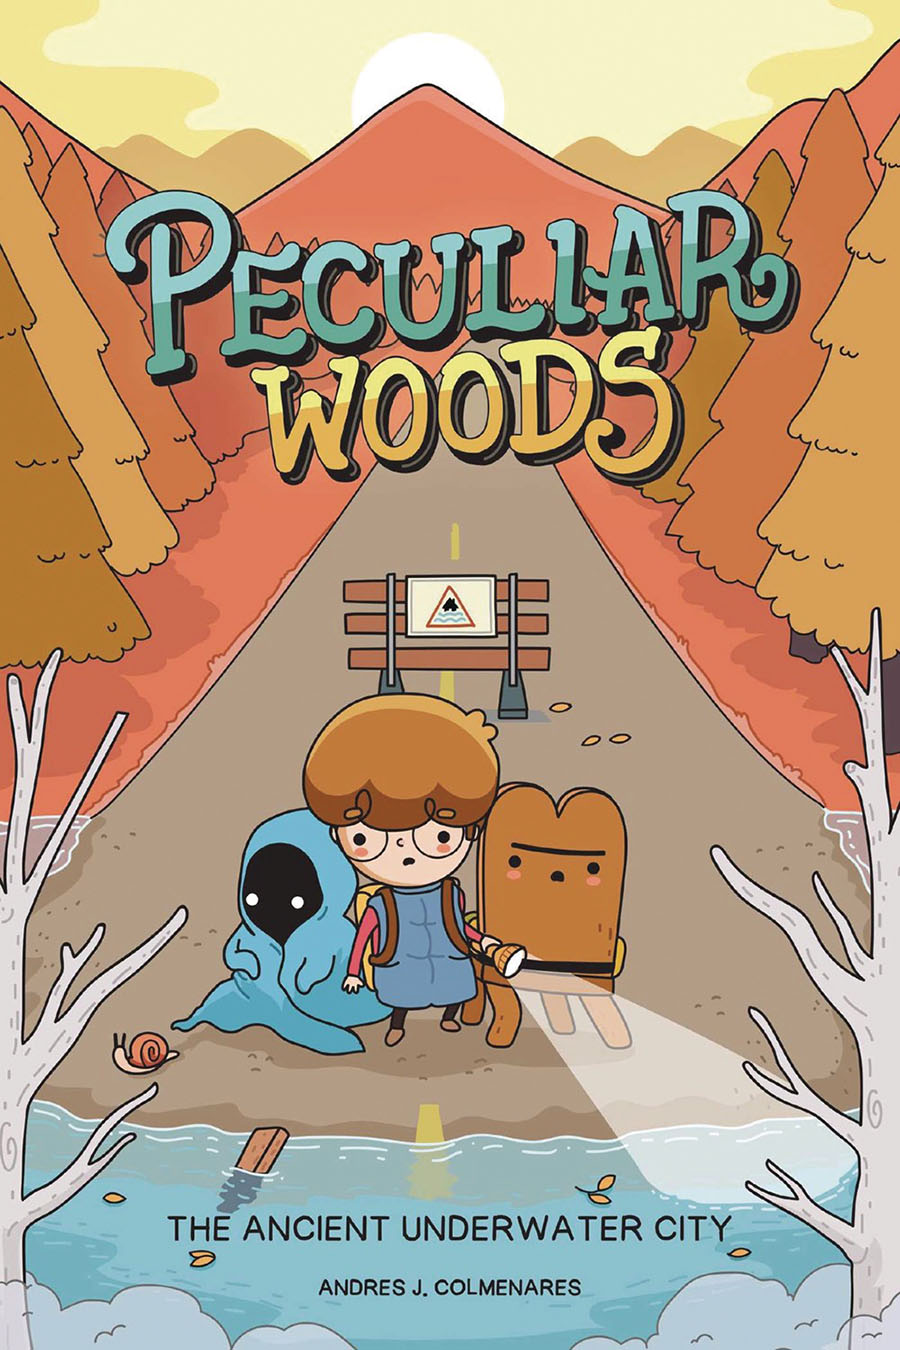 Peculiar Woods Vol 1 The Ancient Underwater City HC